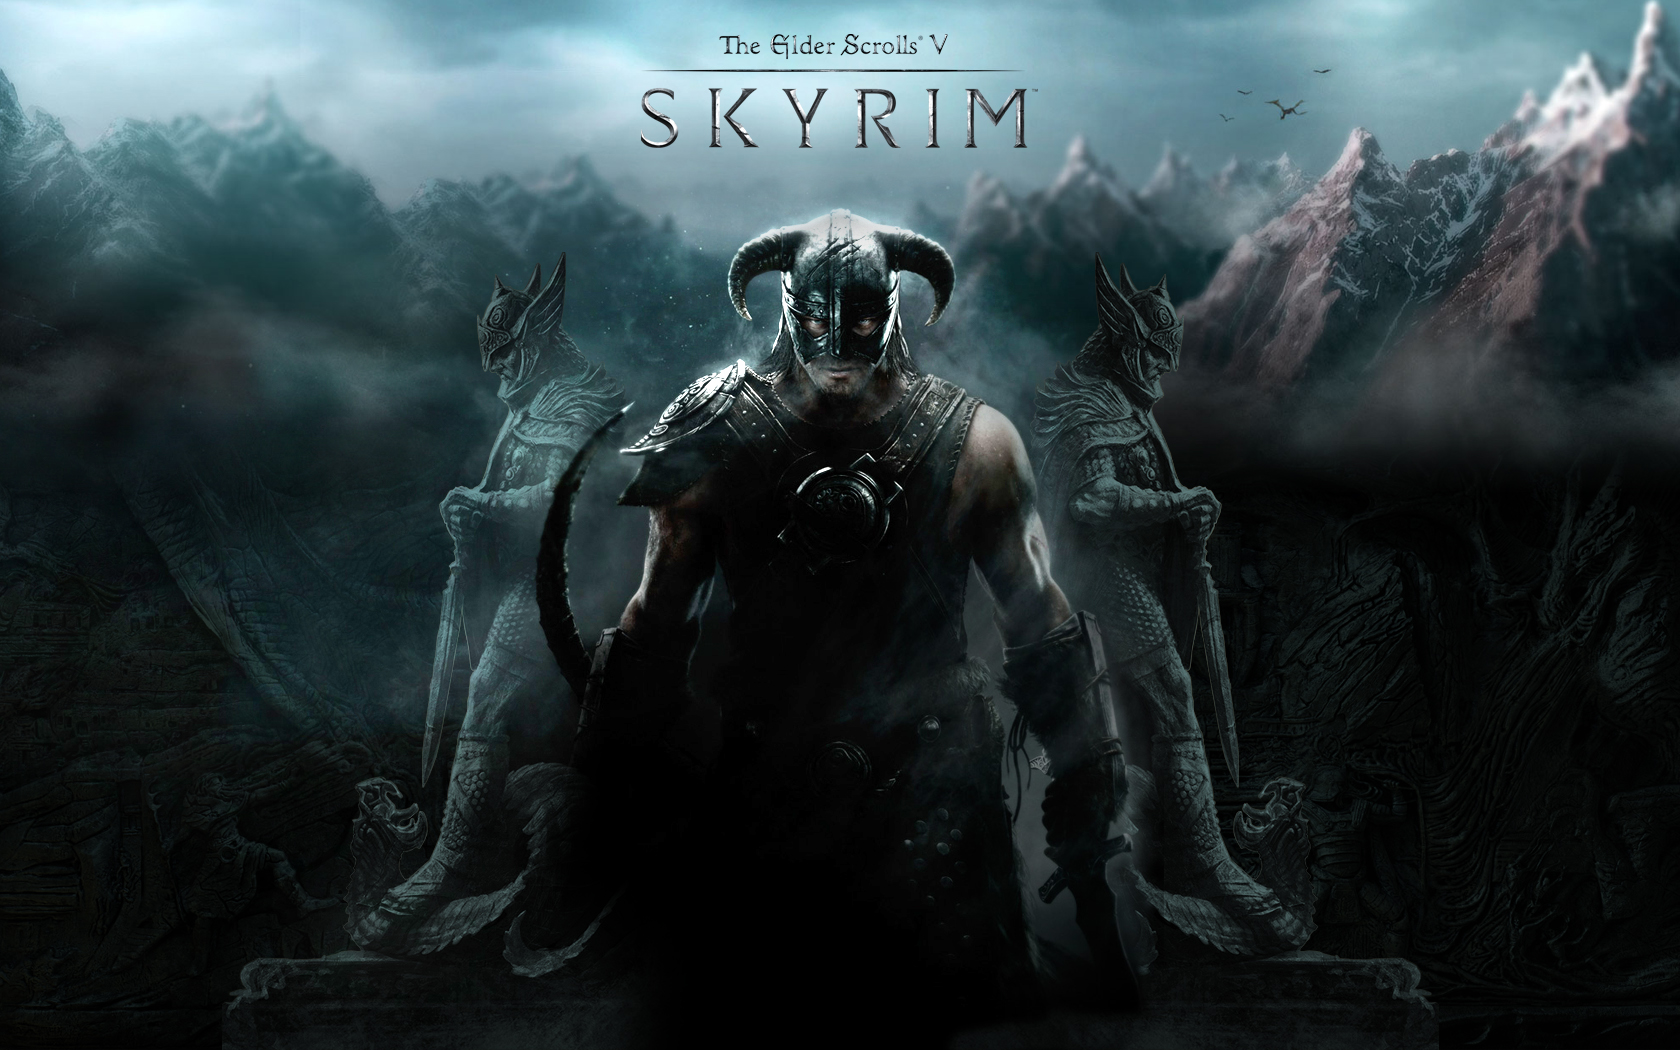 The release of SkyRim Elder Scrolls V The DVDBlu Ray release of the